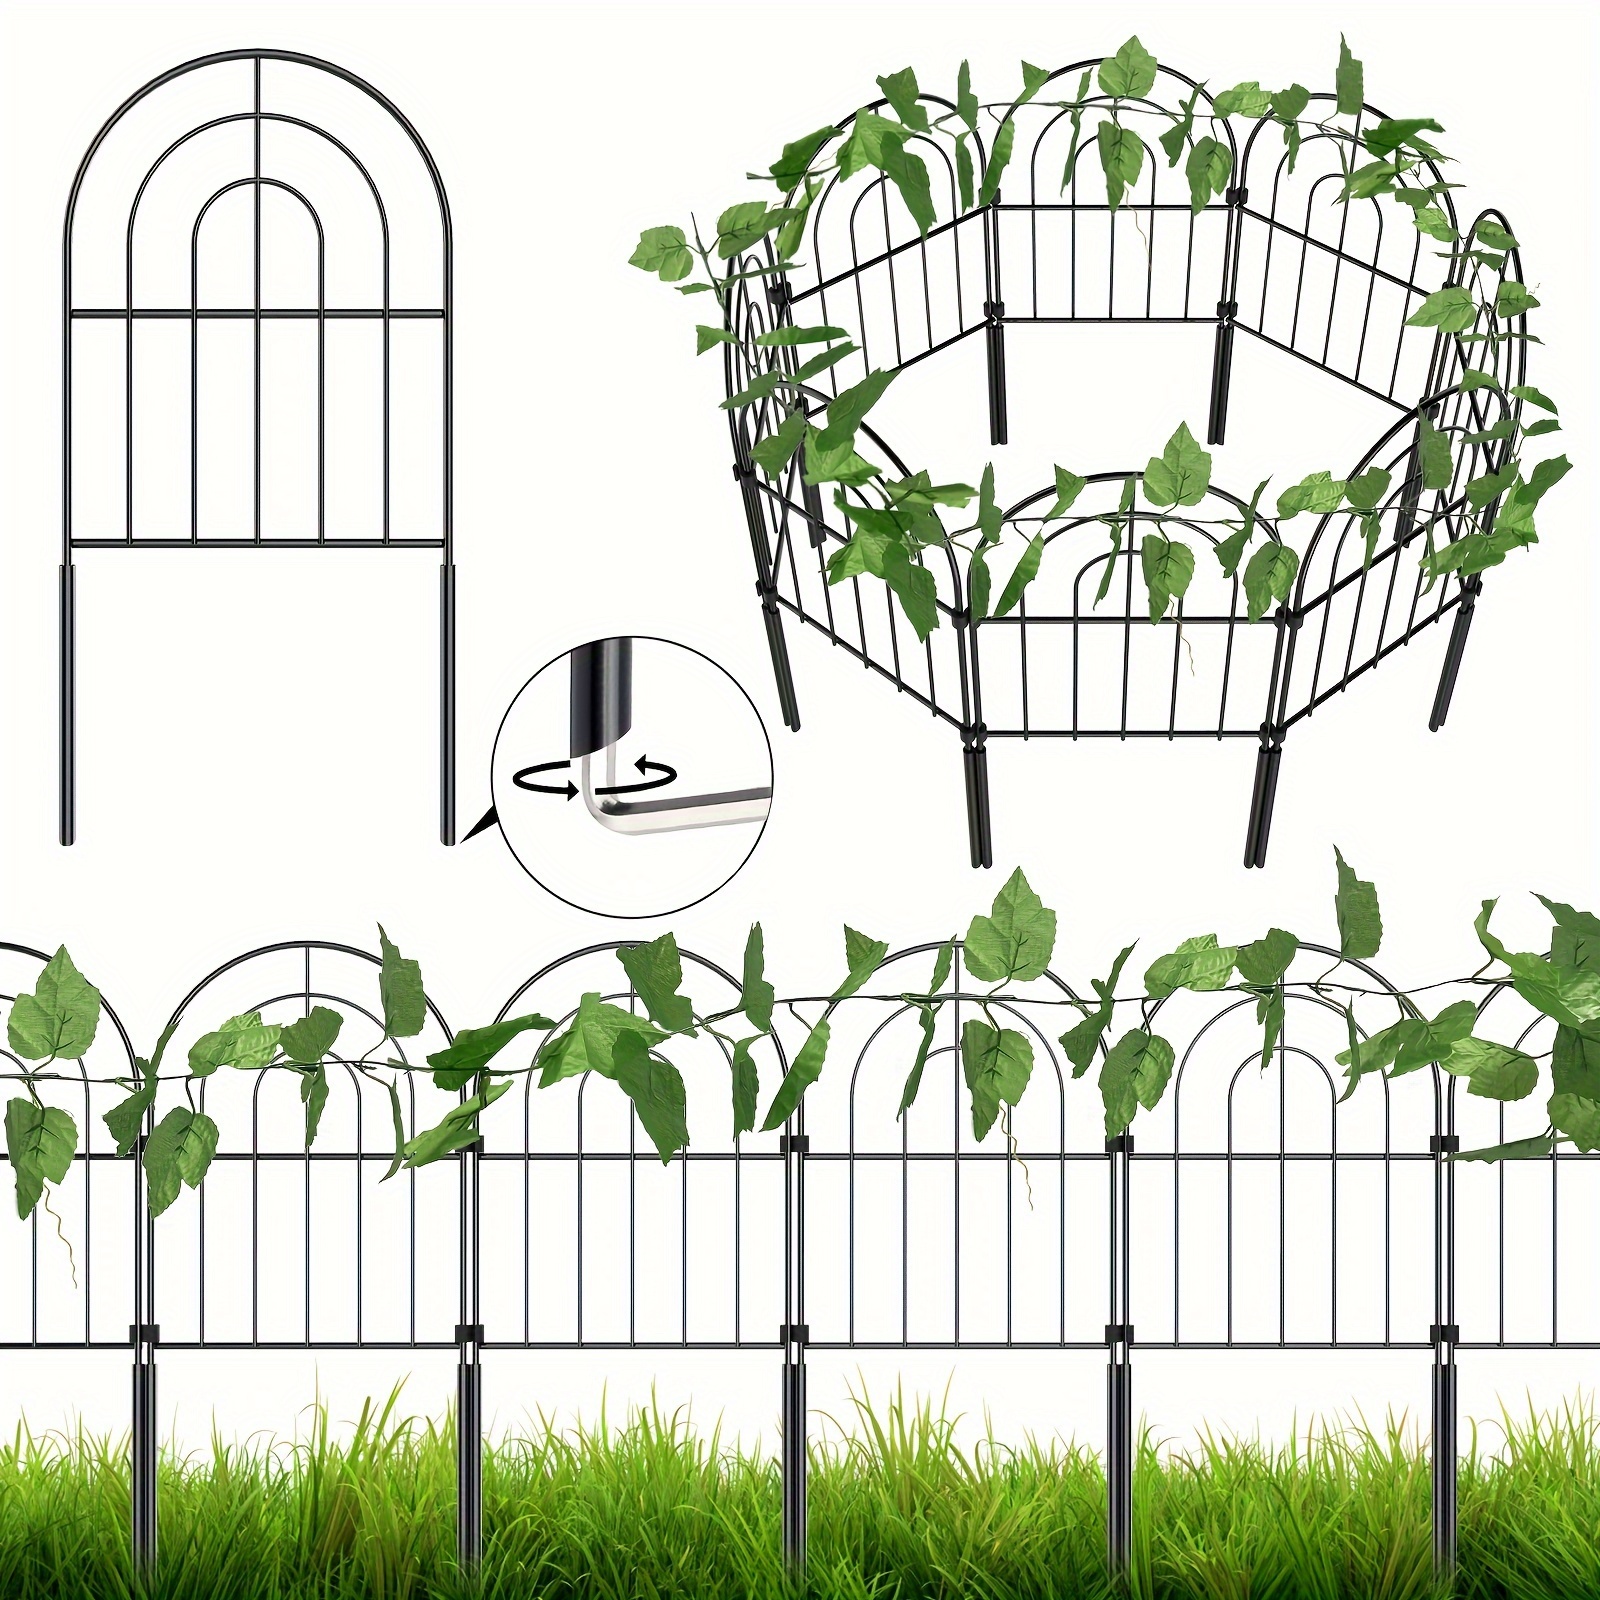 

Decorative Garden Fence Set - 10in (l) X 24in (h) Rustproof Metal Wire Fencing Border With 16ft Decorative Leaves - No Dig Design Ideal For Animal Barrier & Flower Edging - Perfect For Outdoor